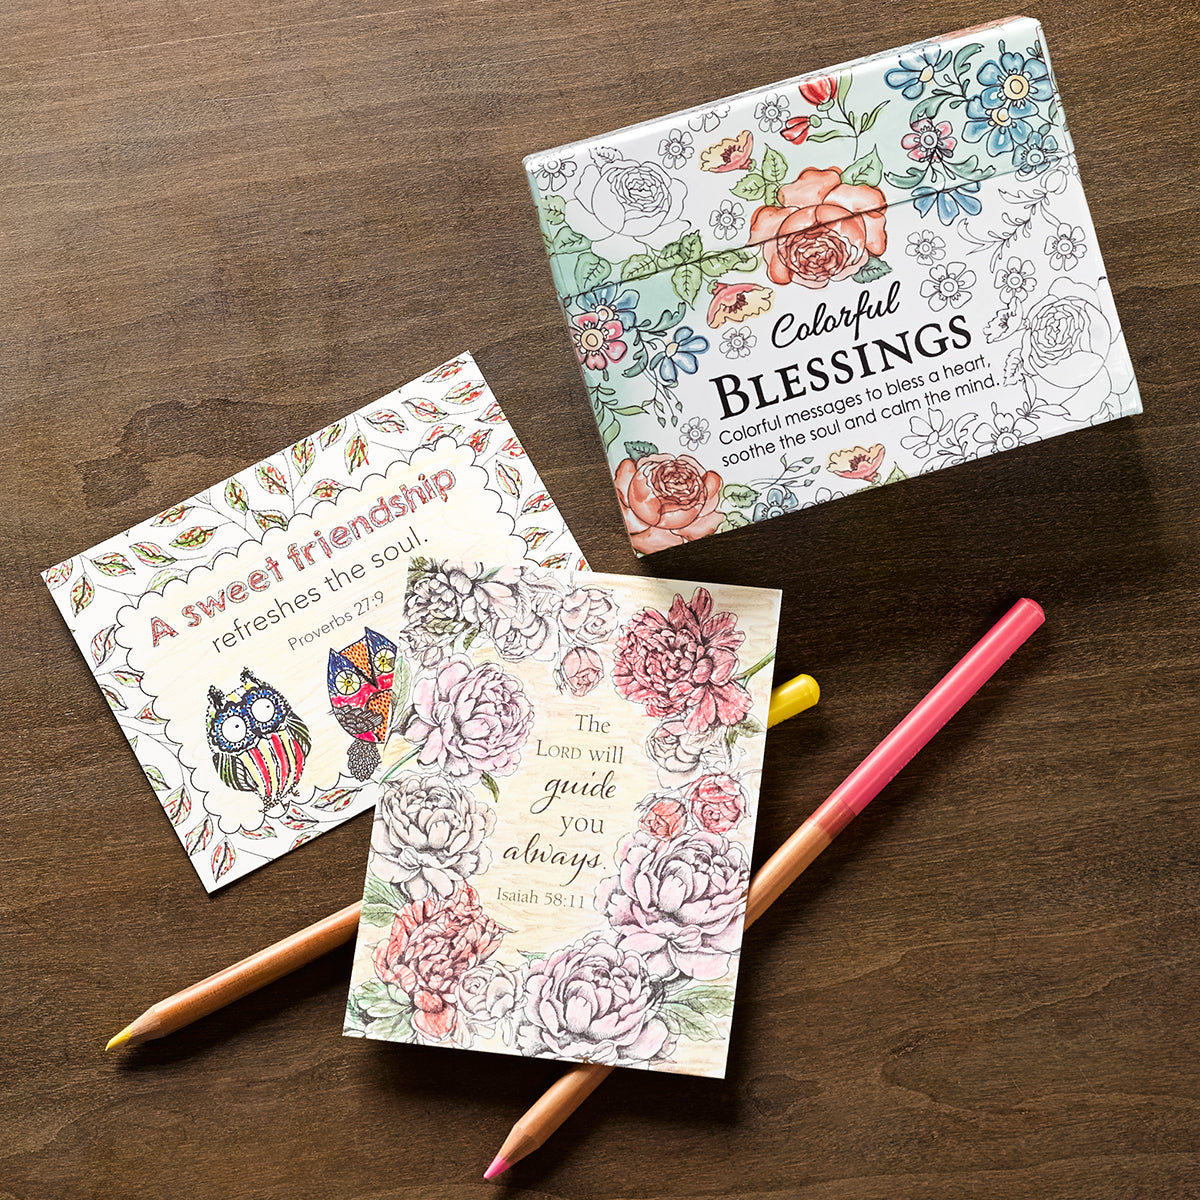 Image of Colourful Blessings Box of Encouragement Cards other